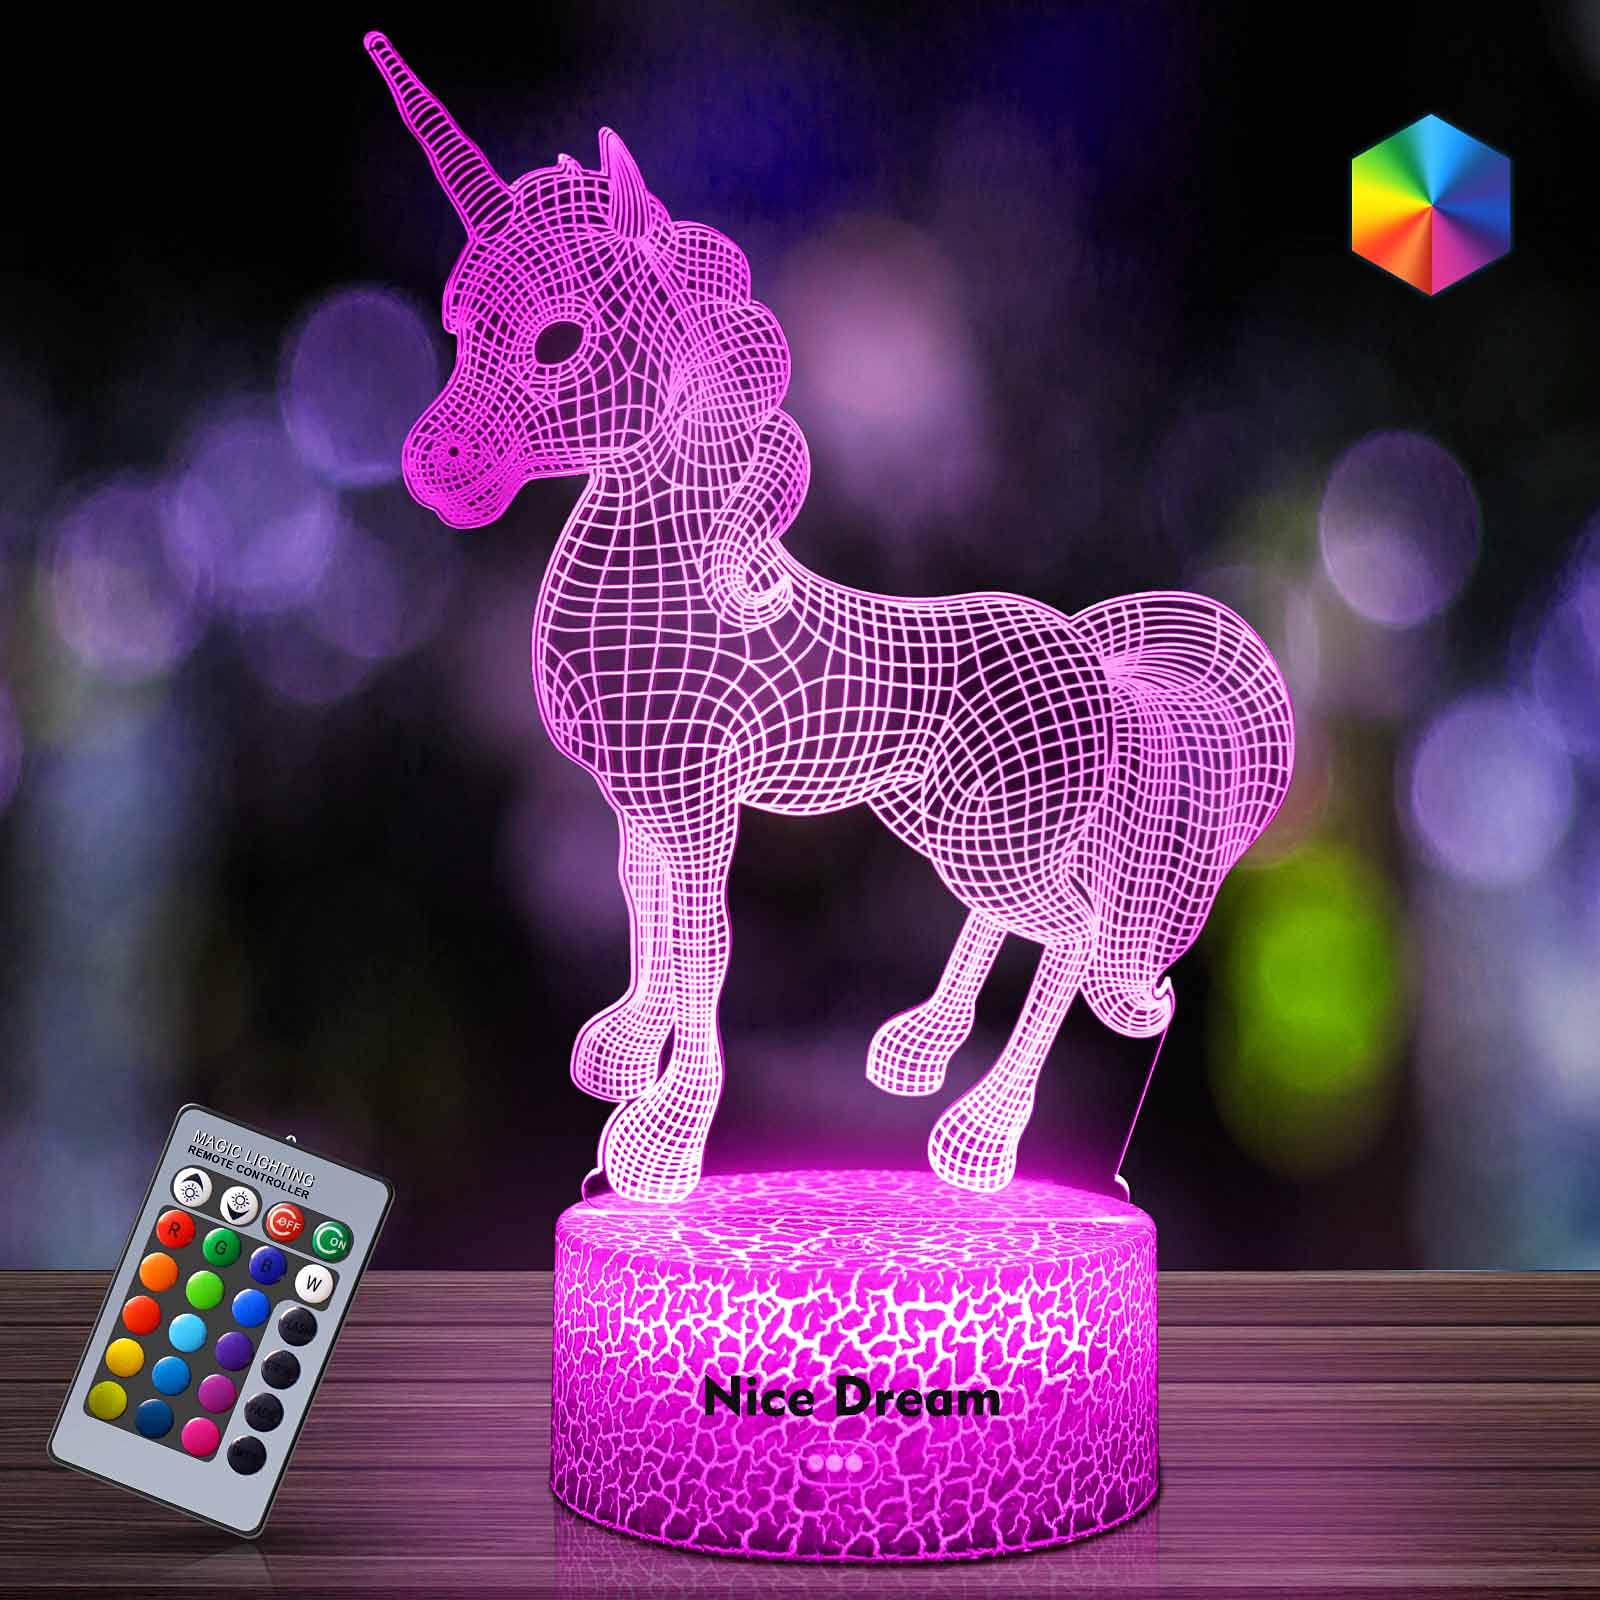 Unicorn Gift Unicorn Night Light for Kids, 3D Light lamp 7 Colors Change with Remote Holiday and Birthday Gifts Ideas for Children (Unicorn)